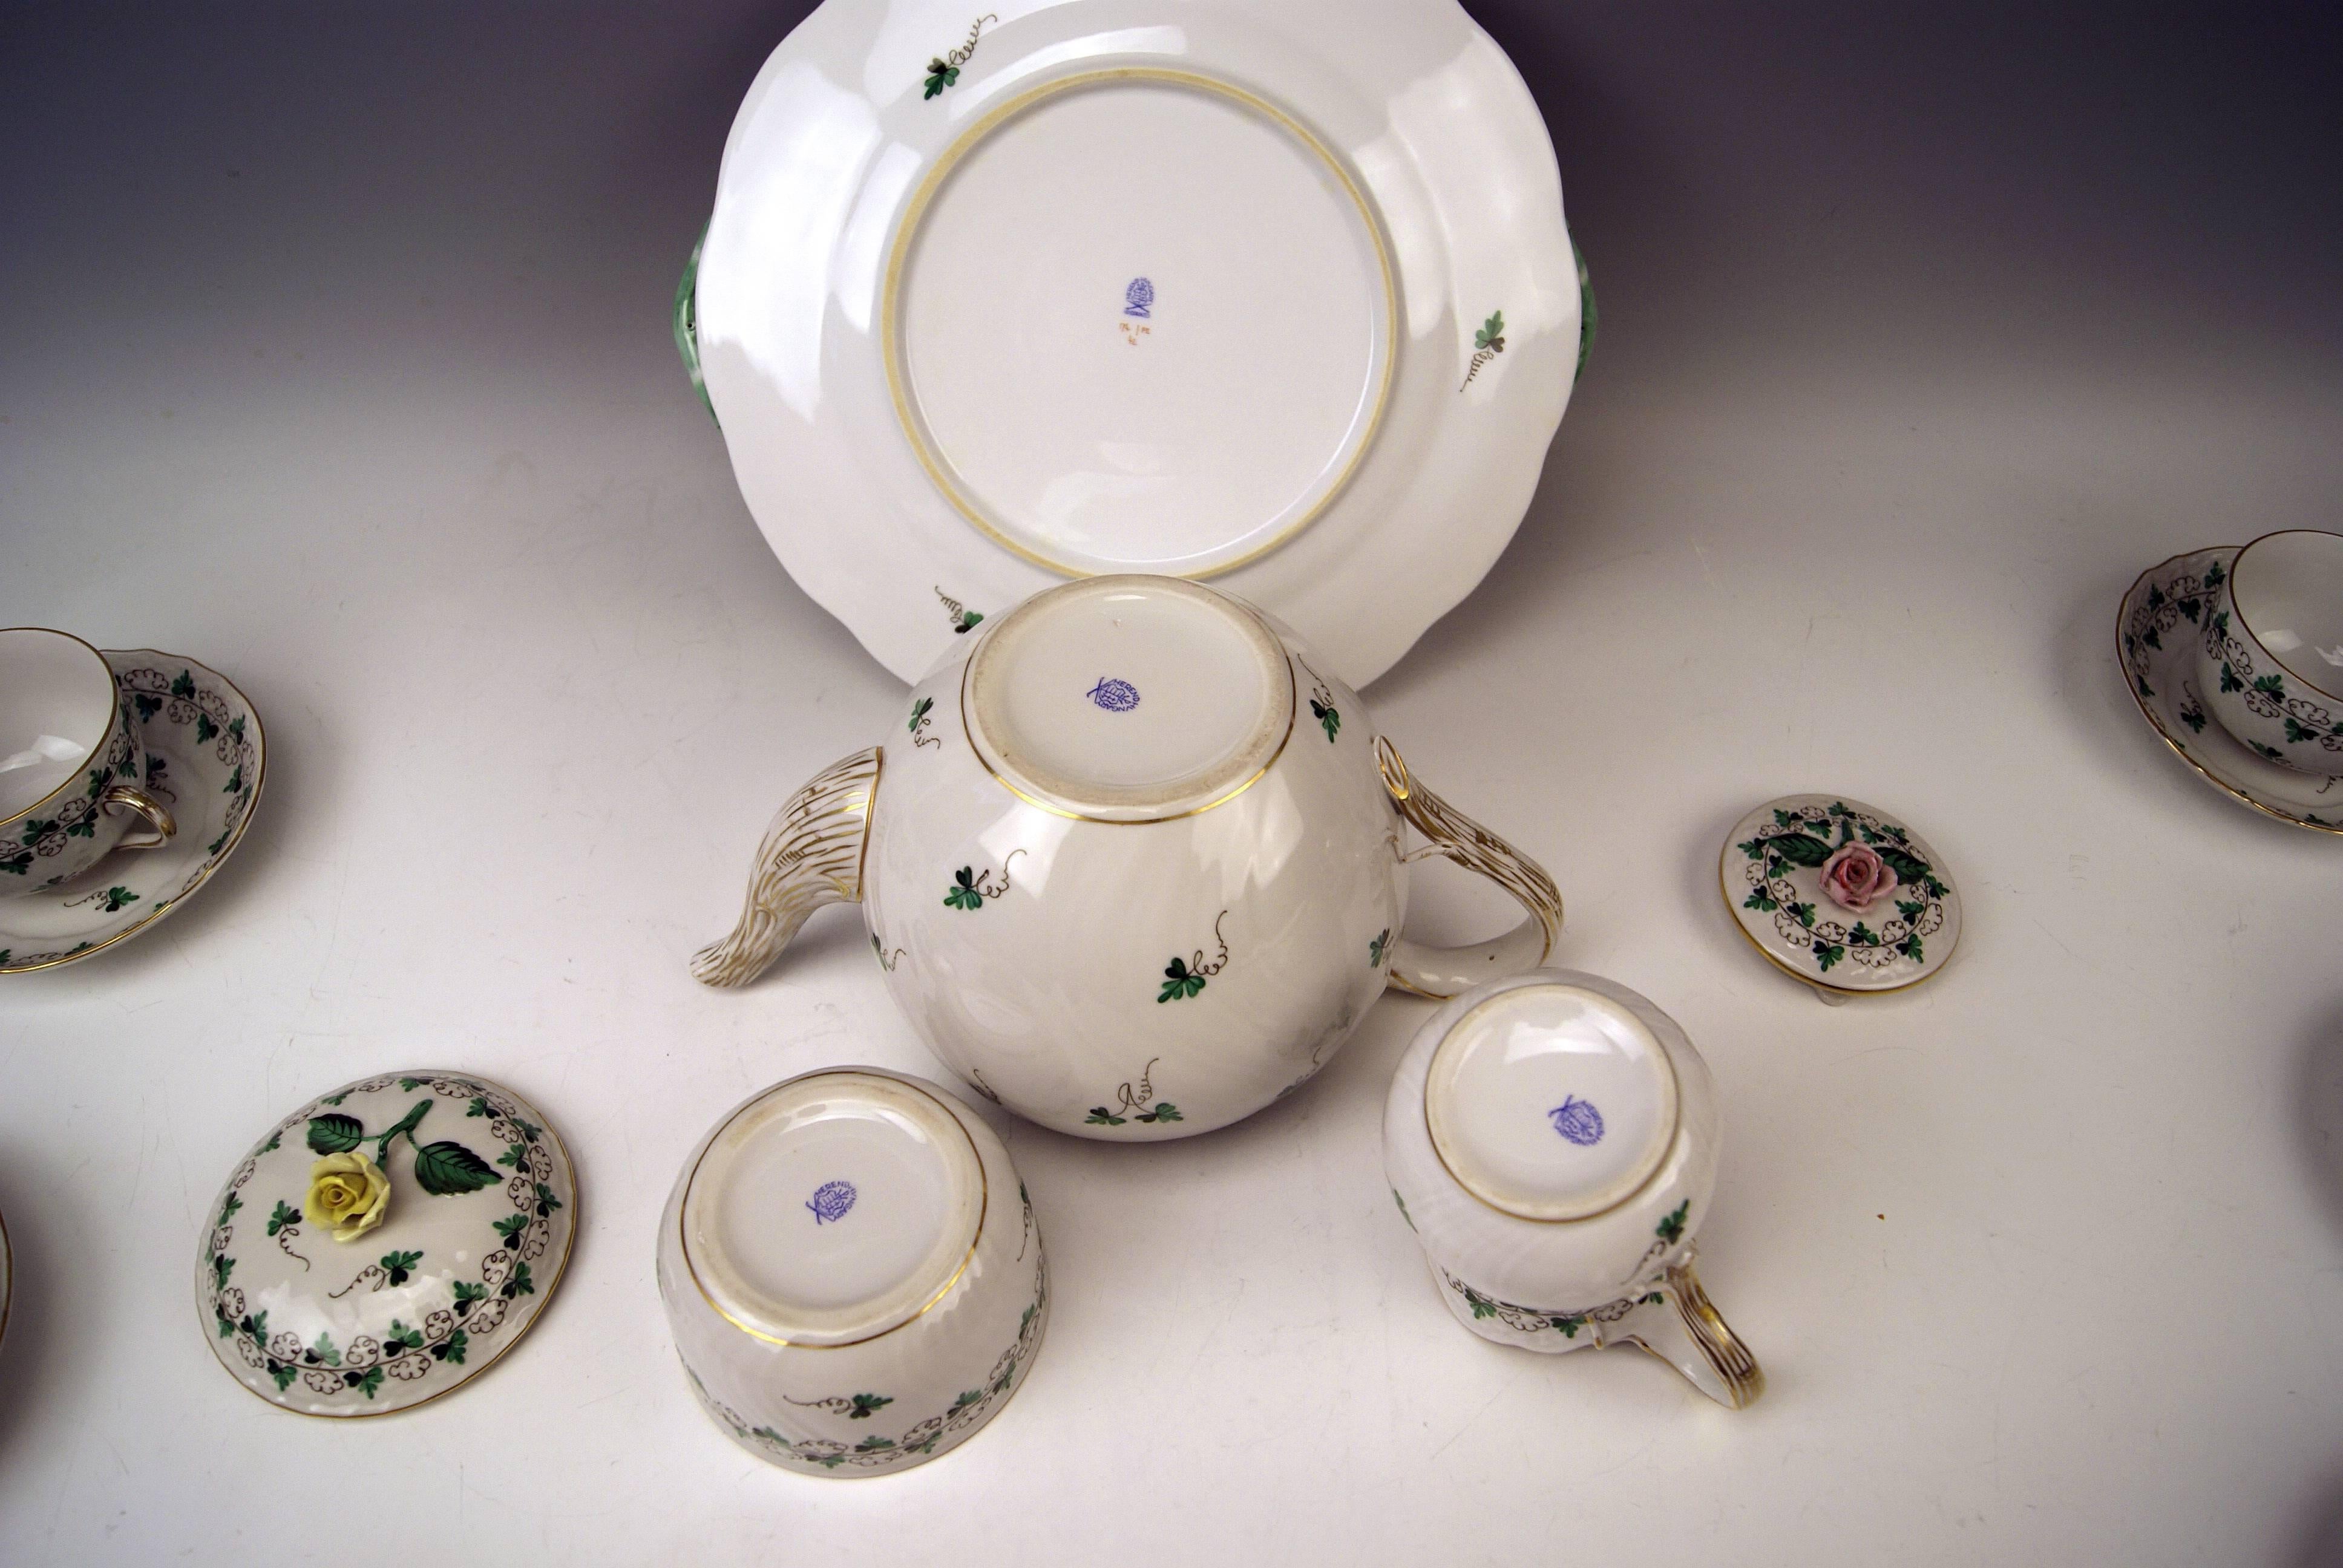 20th Century Herend Tea Set for Six Persons Decor Persil, circa 1960